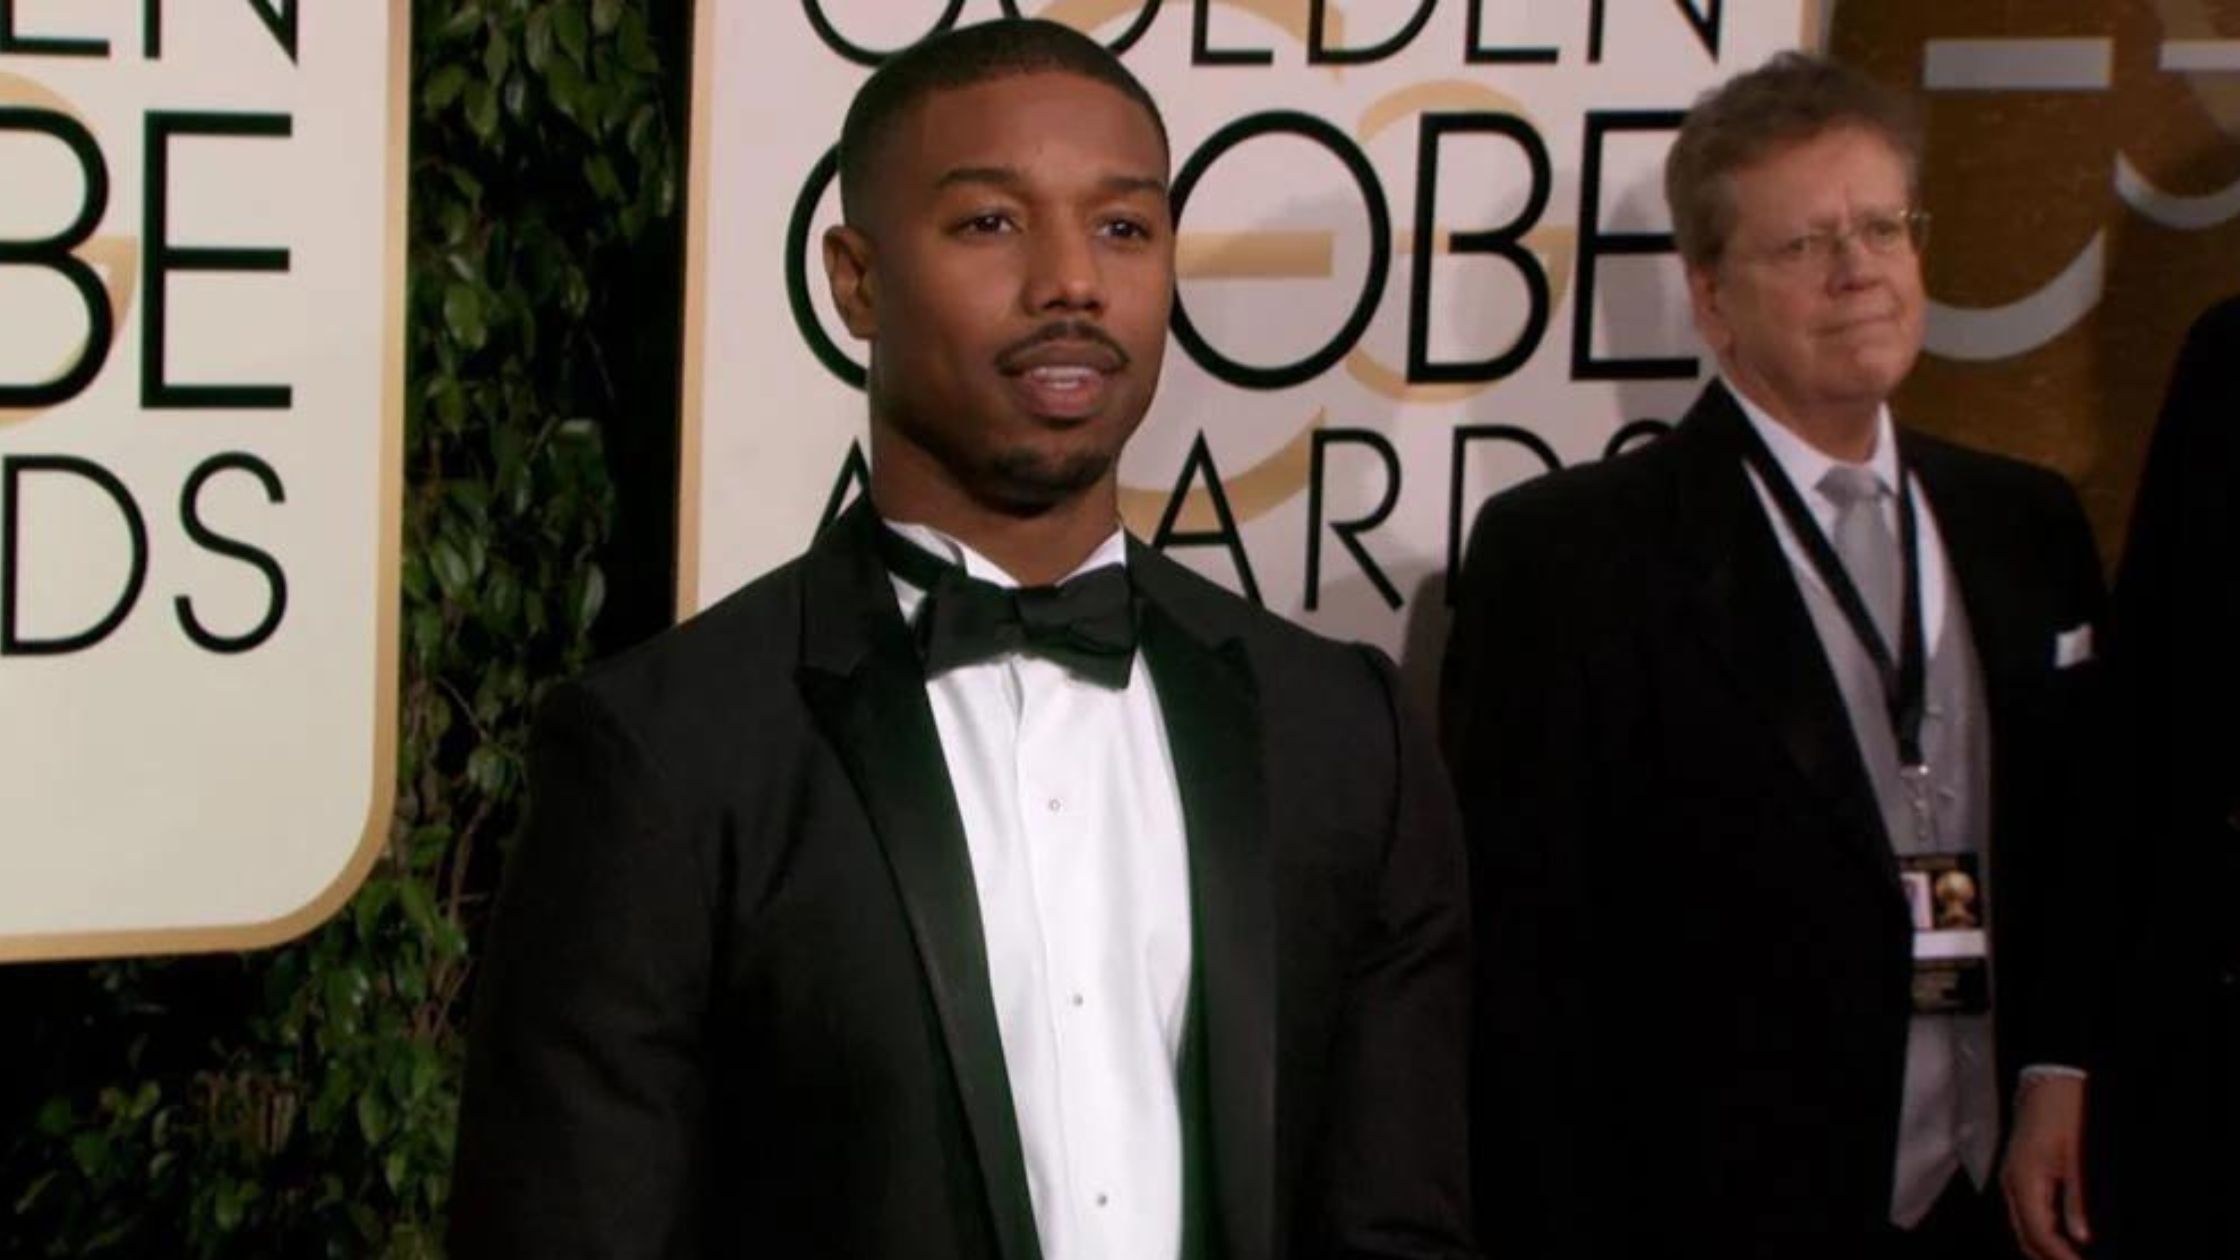 Michael B. Jordan’s Rise to Stardom: The Impact of “The Wire”